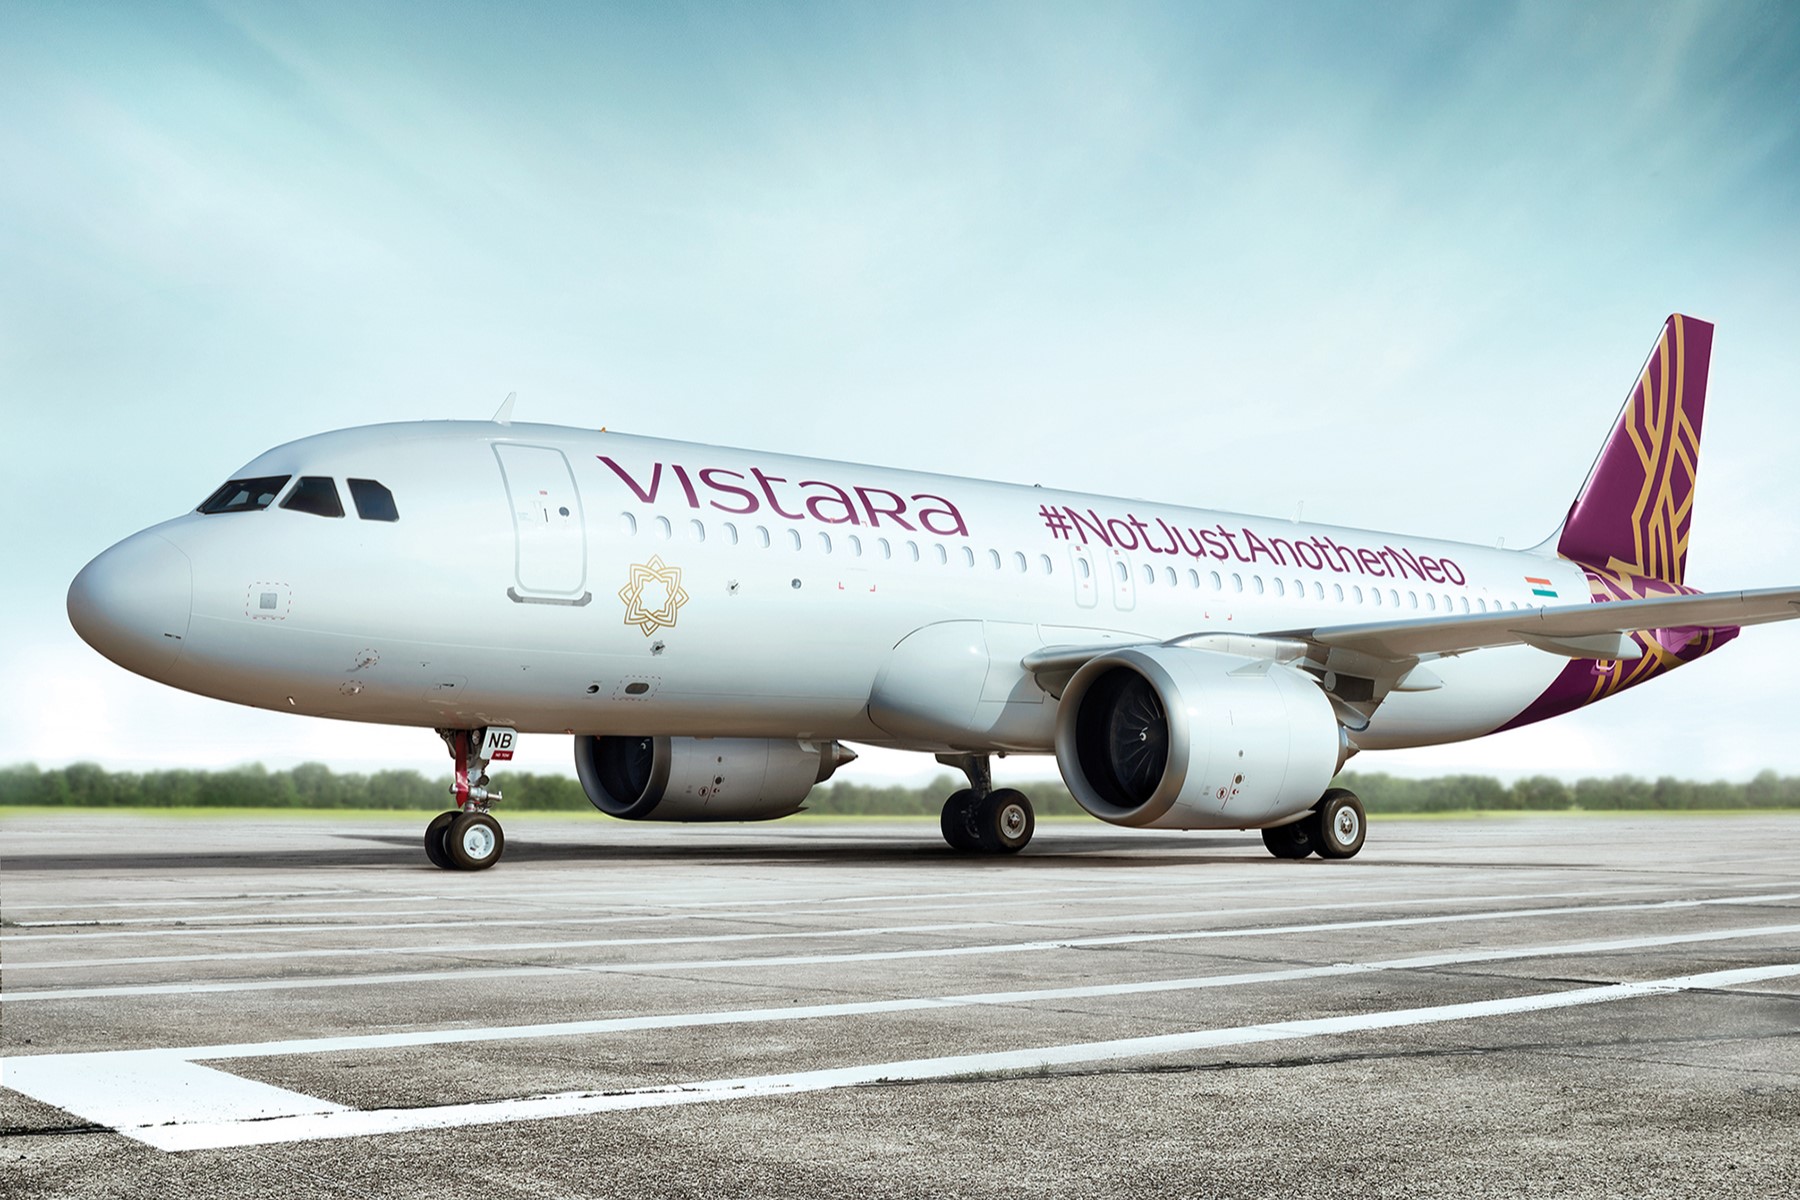 Vistara starts network-wide sale on the occasion of its 8th anniversary